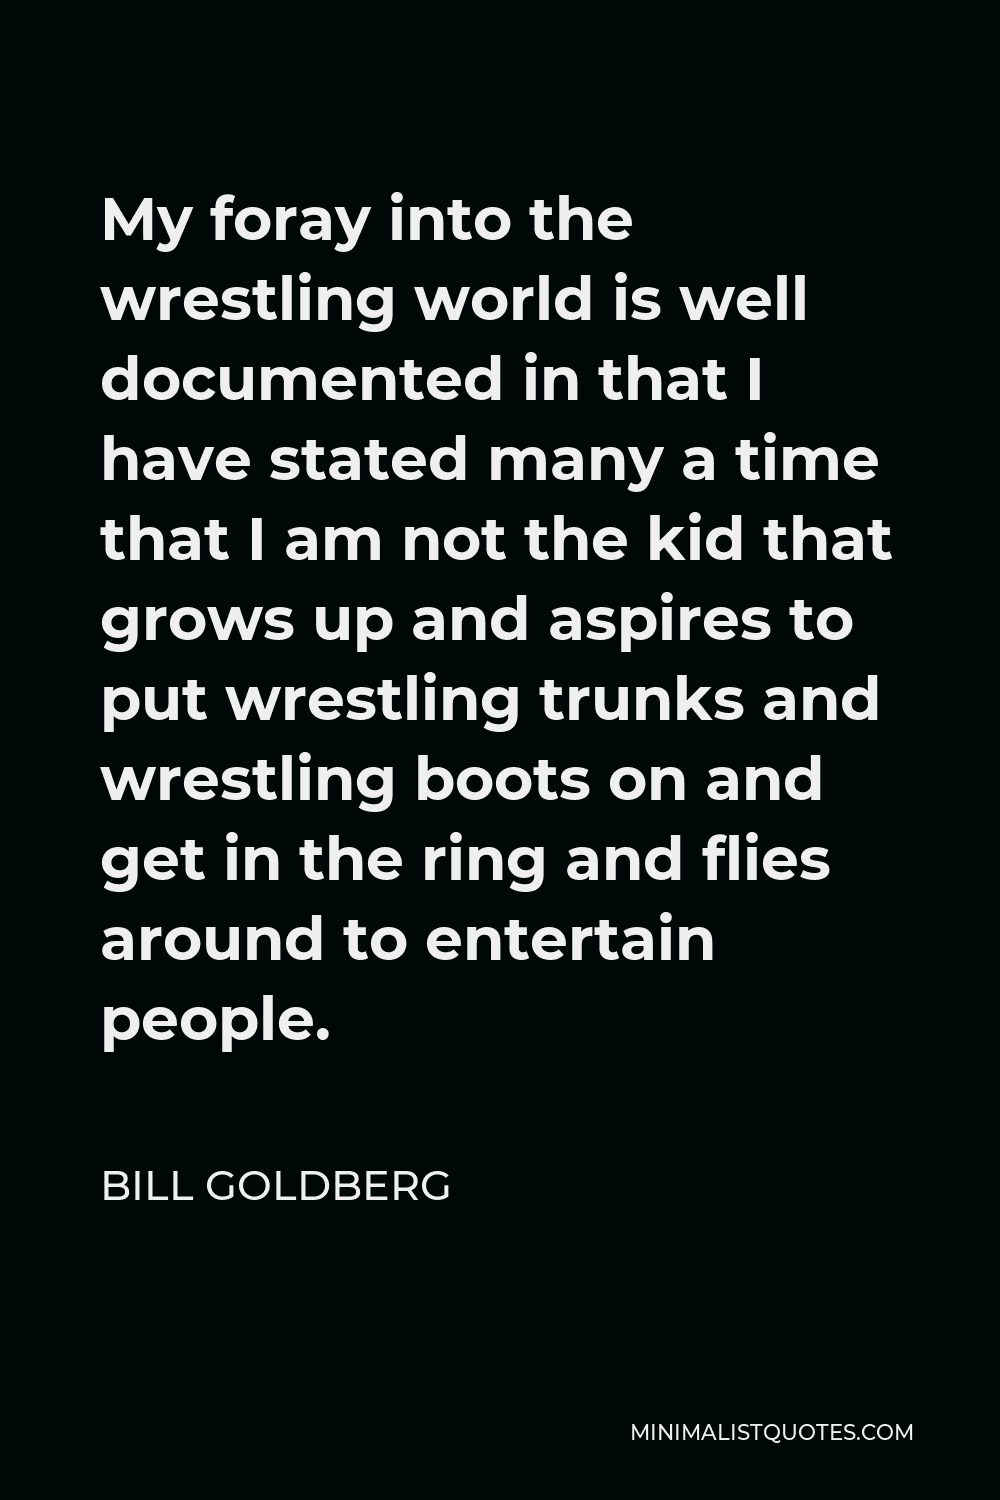 Bill Goldberg Quote - My foray into the wrestling world is well documented in that I have stated many a time that I am not the kid that grows up and aspires to put wrestling trunks and wrestling boots on and get in the ring and flies around to entertain people.